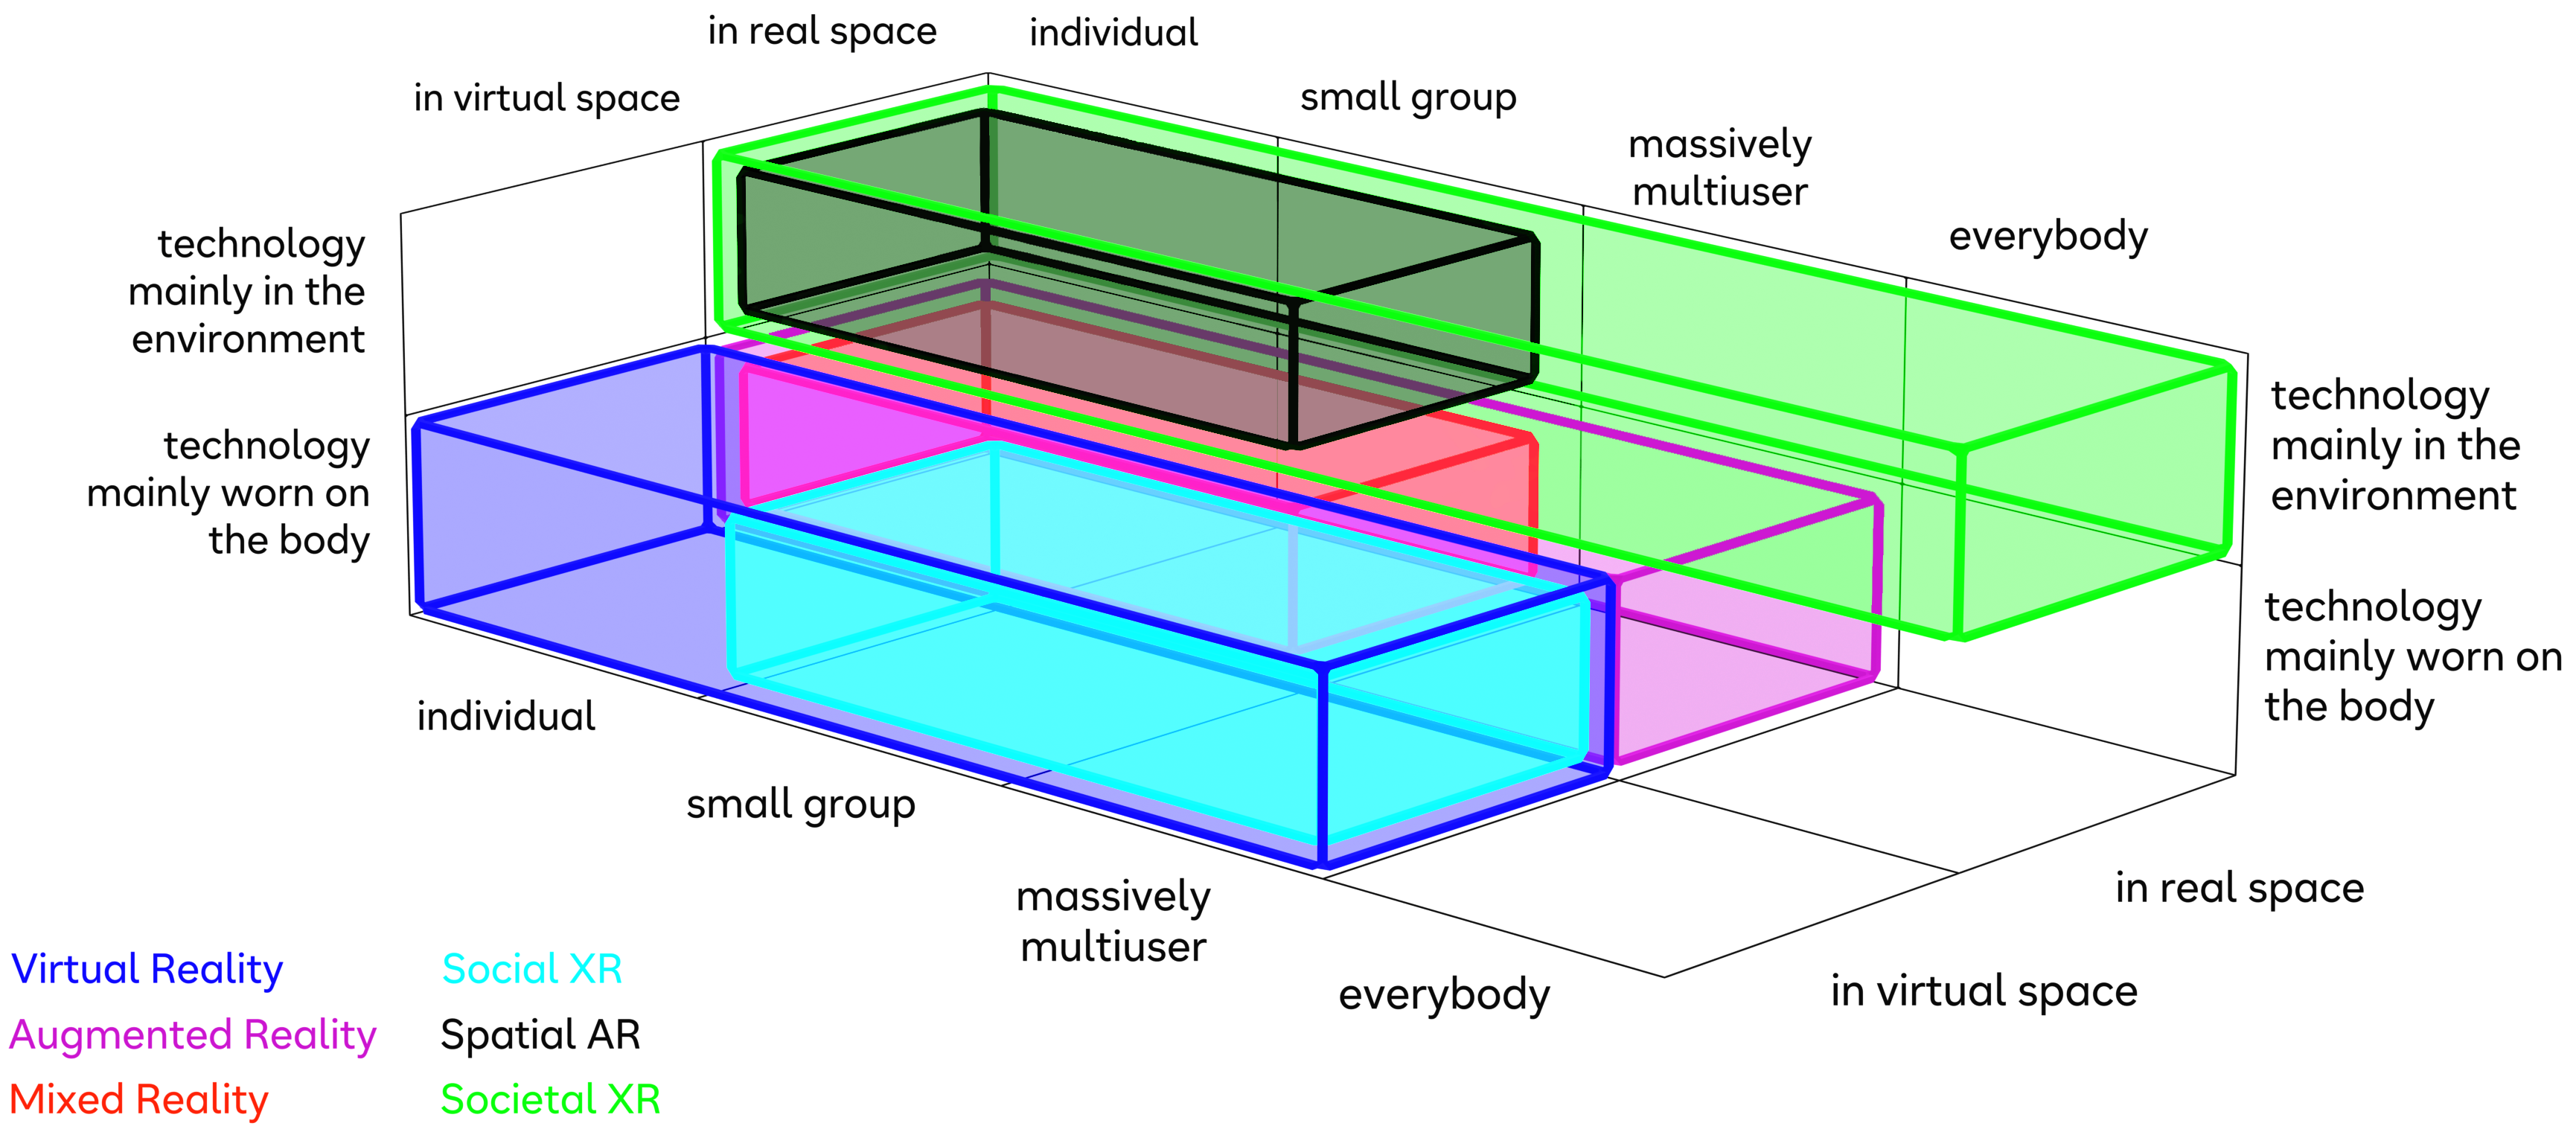 Three-dimensional categorization of XR paradigms with respect to technology (mainly on or off the user’s body), space (virtual or real), and accessibility (number of potential users). Societal XR is highlighted in green.